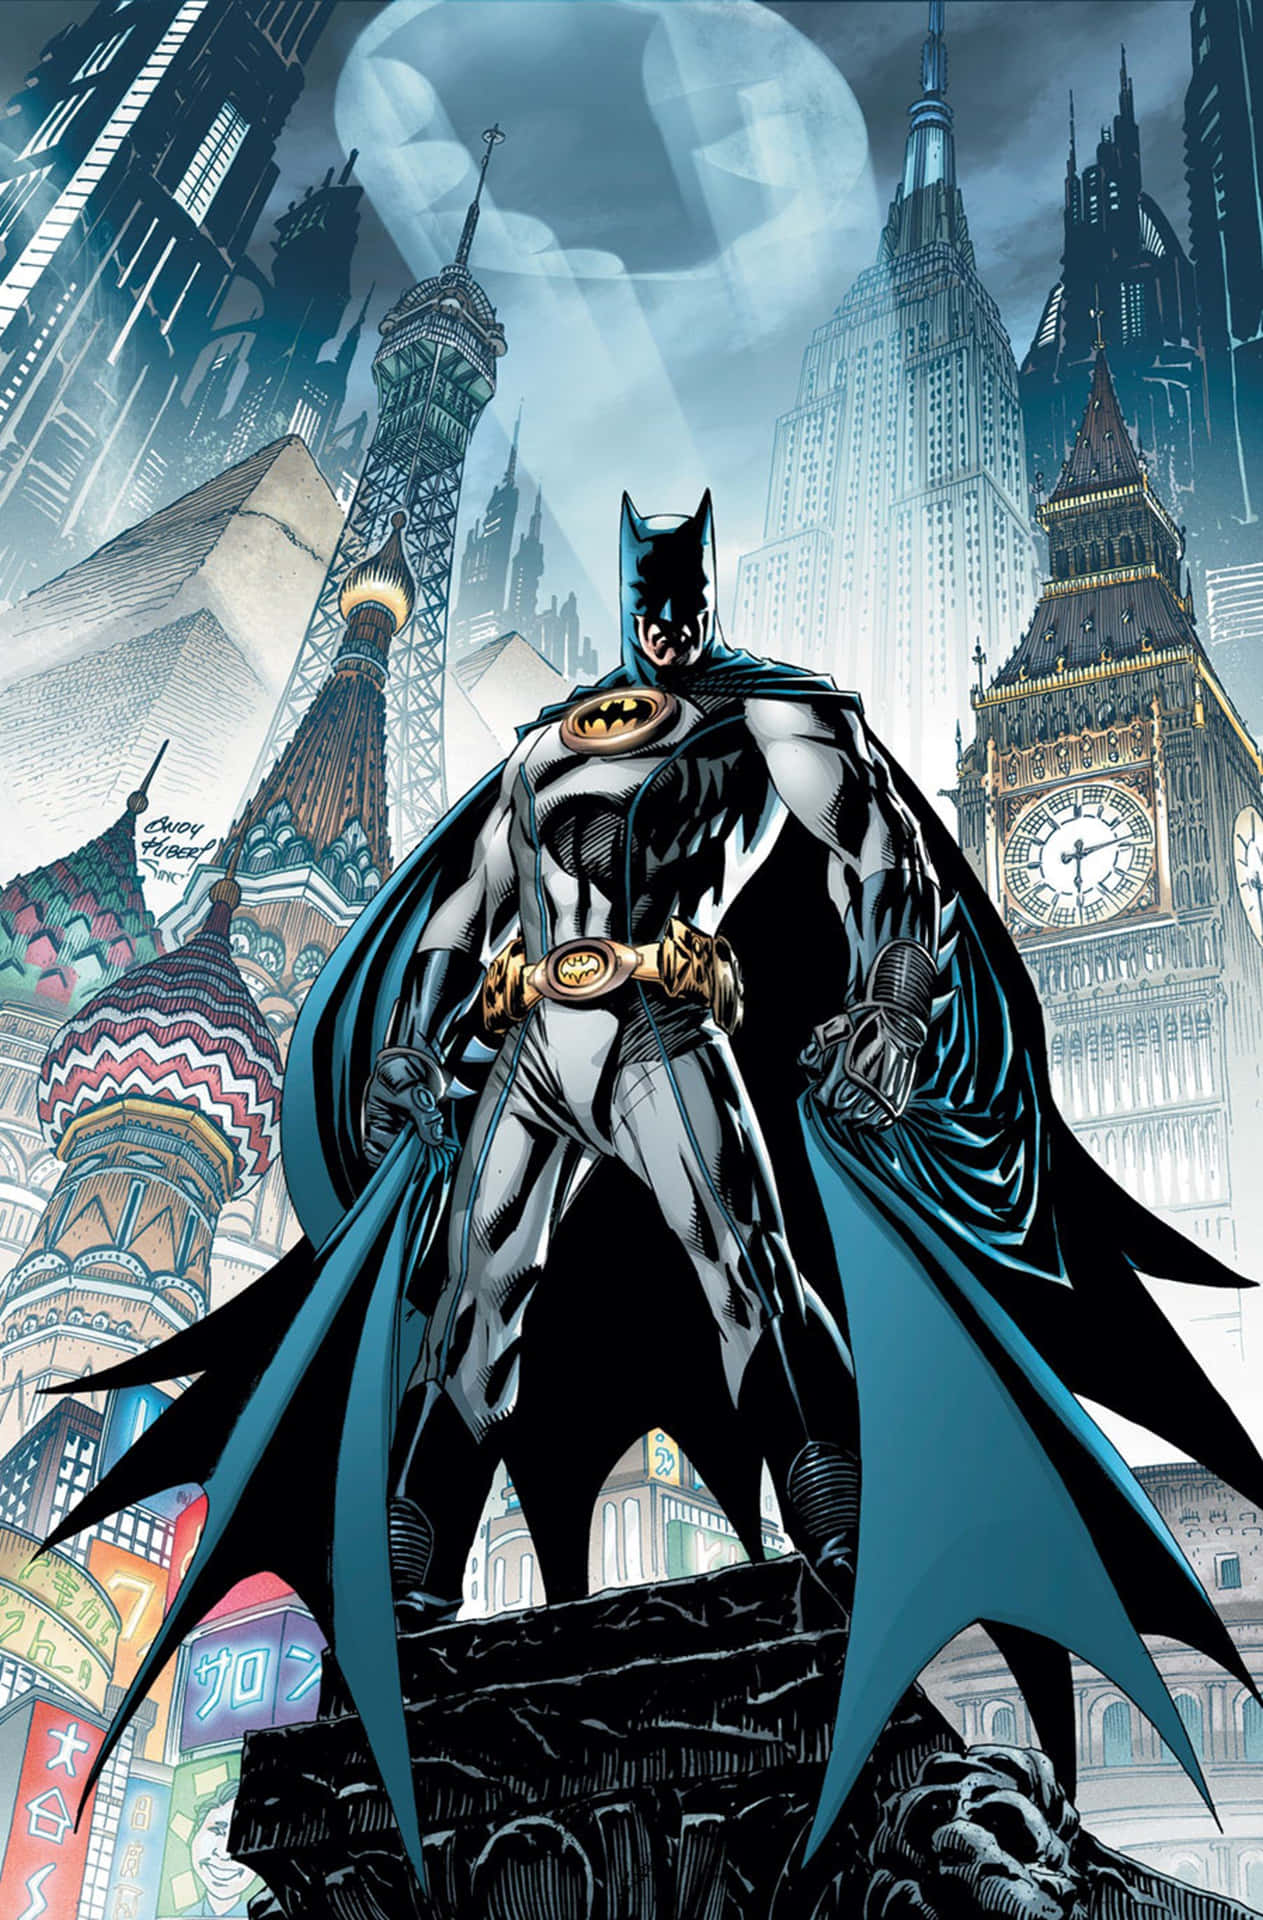 Show Off Your Batman Pride with an Awesome Batman iPhone Wallpaper Wallpaper